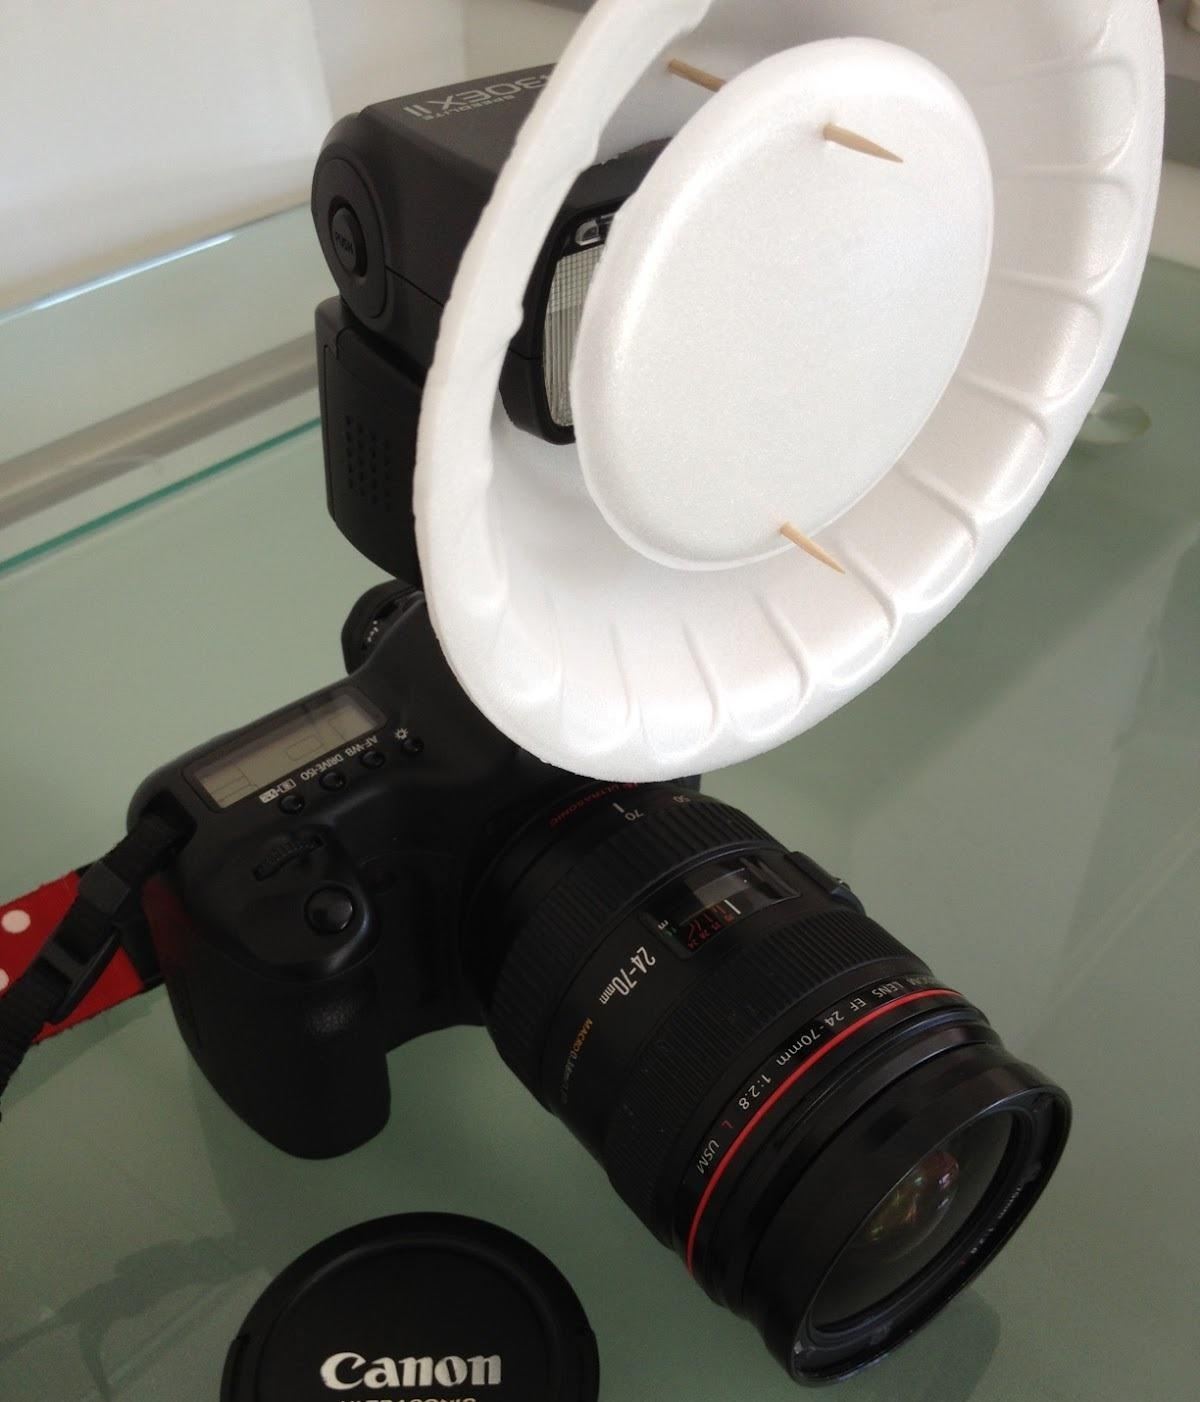 How to Turn a Styrofoam Bowl into a DIY Beauty Dish for Your Camera's Flash